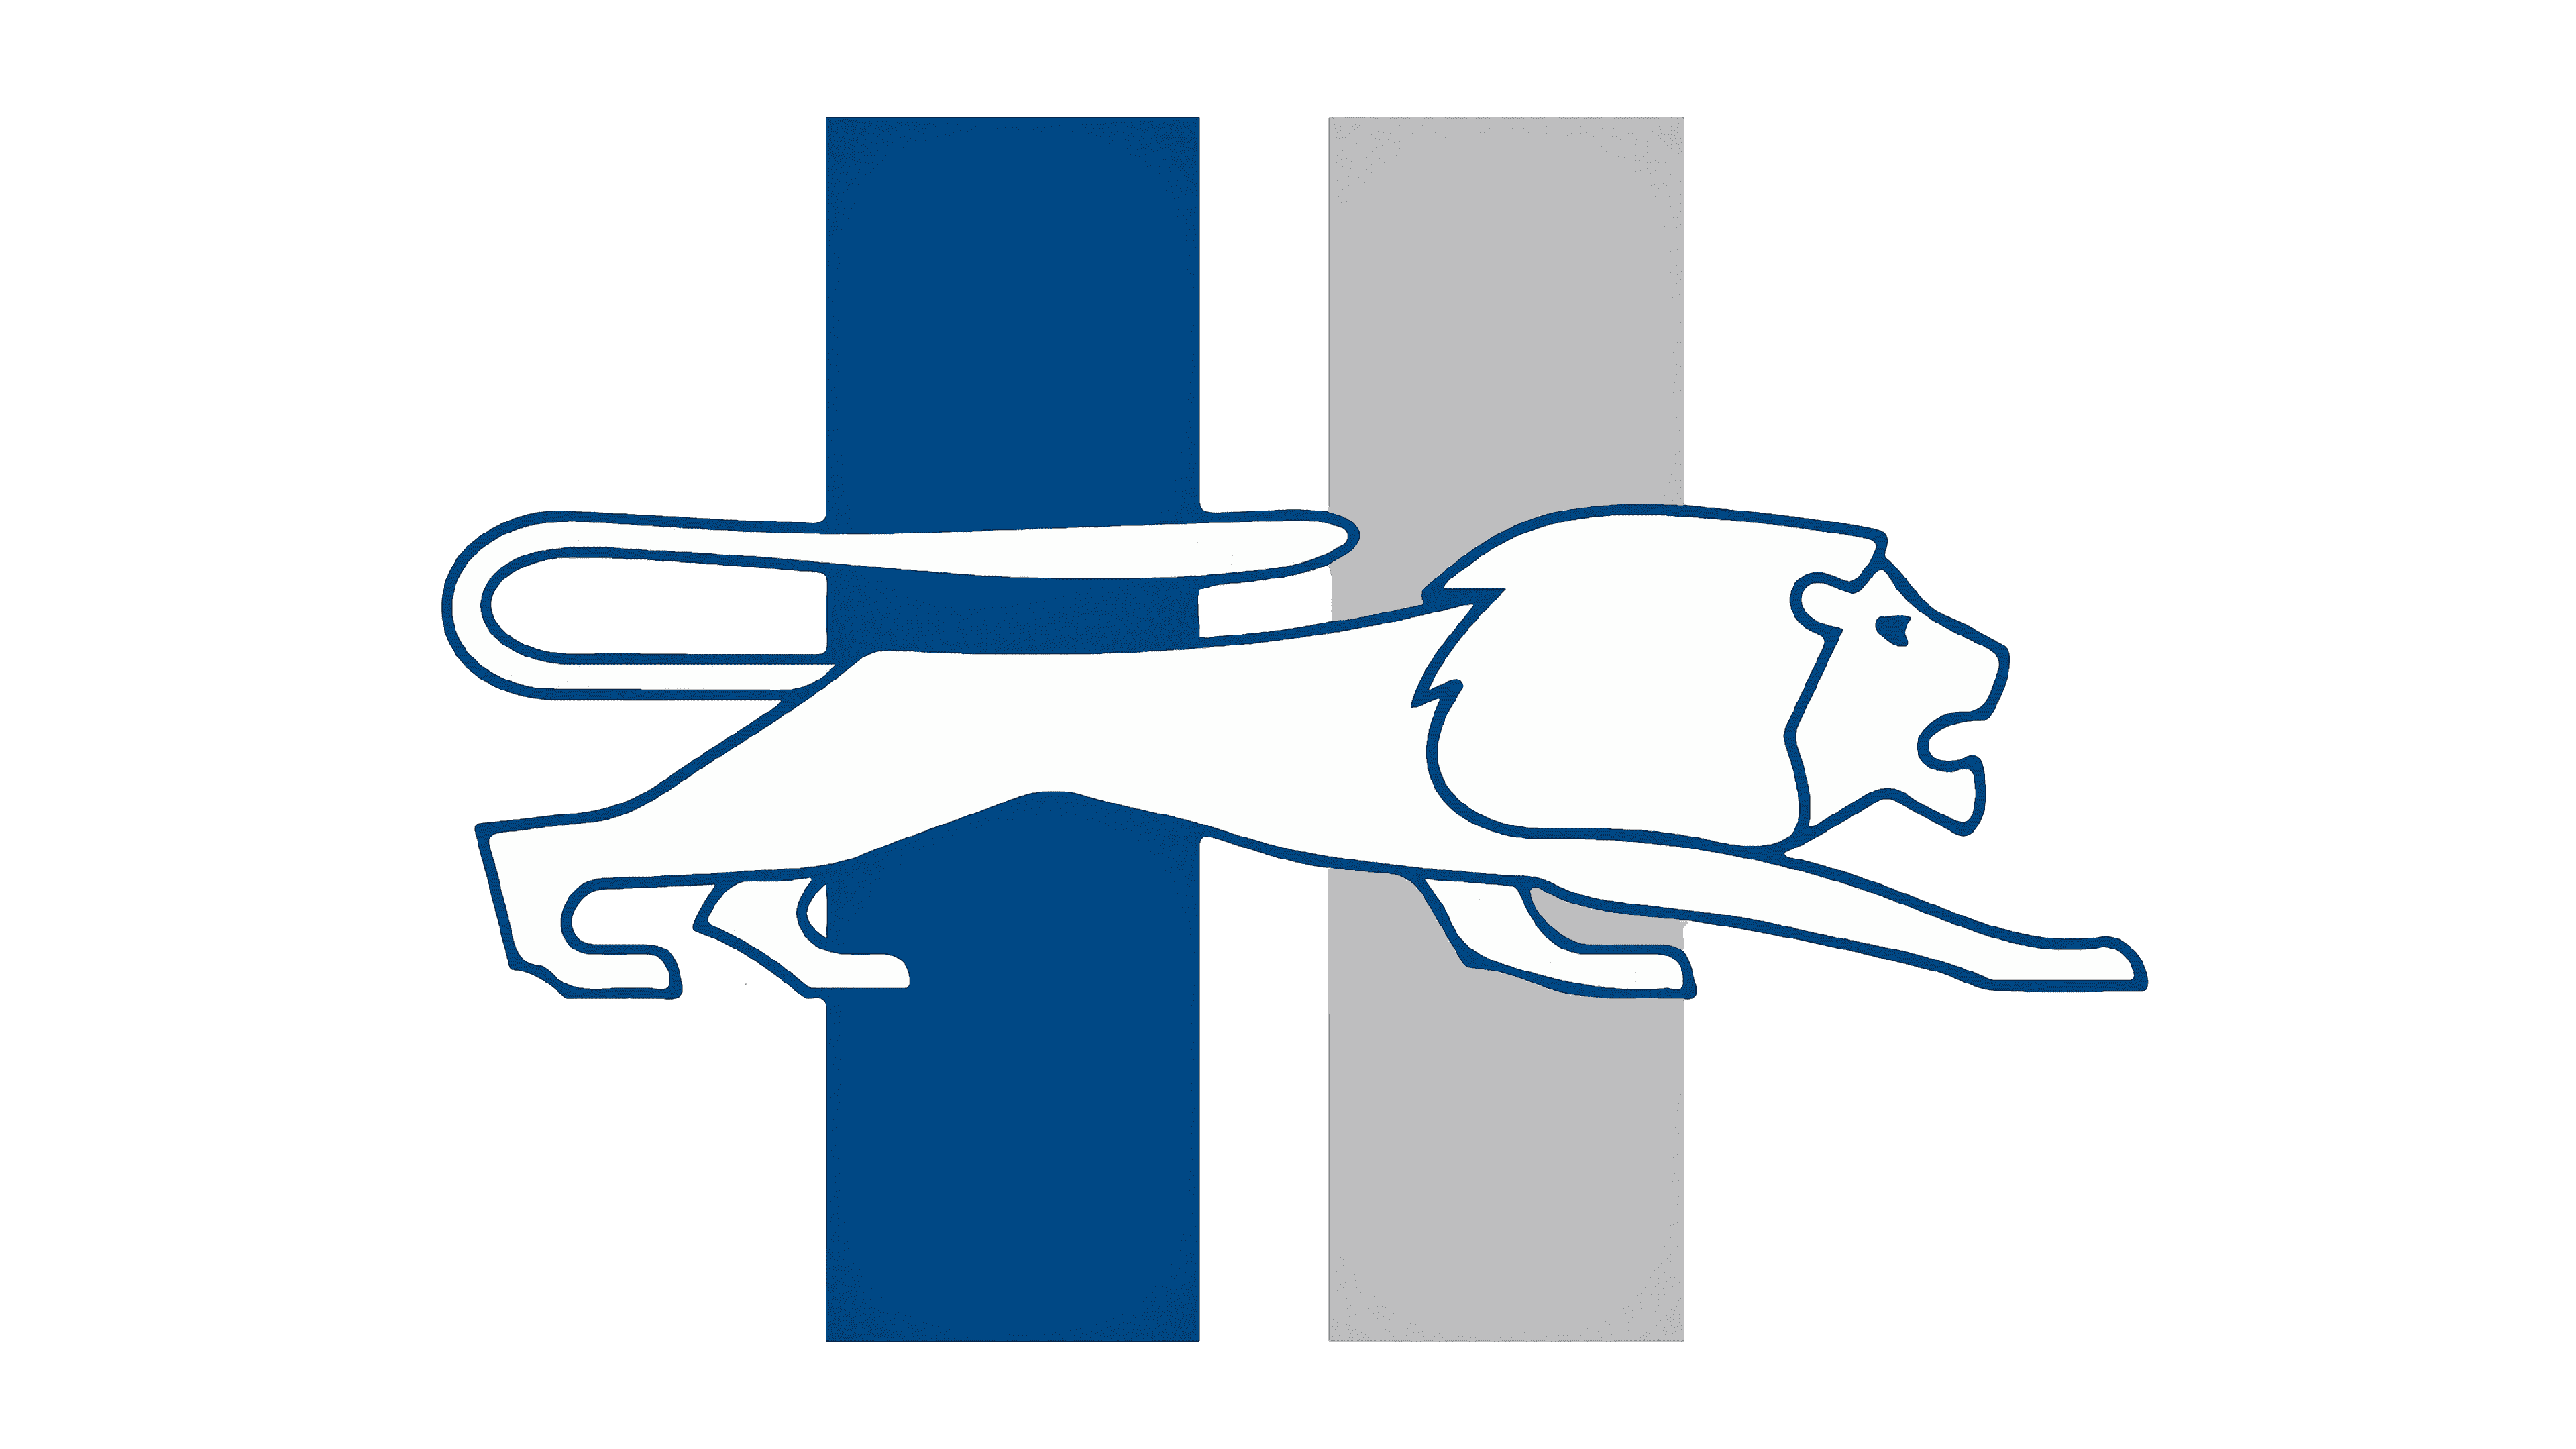 Detroit Lions Logo and sign, new logo meaning and history, PNG, SVG